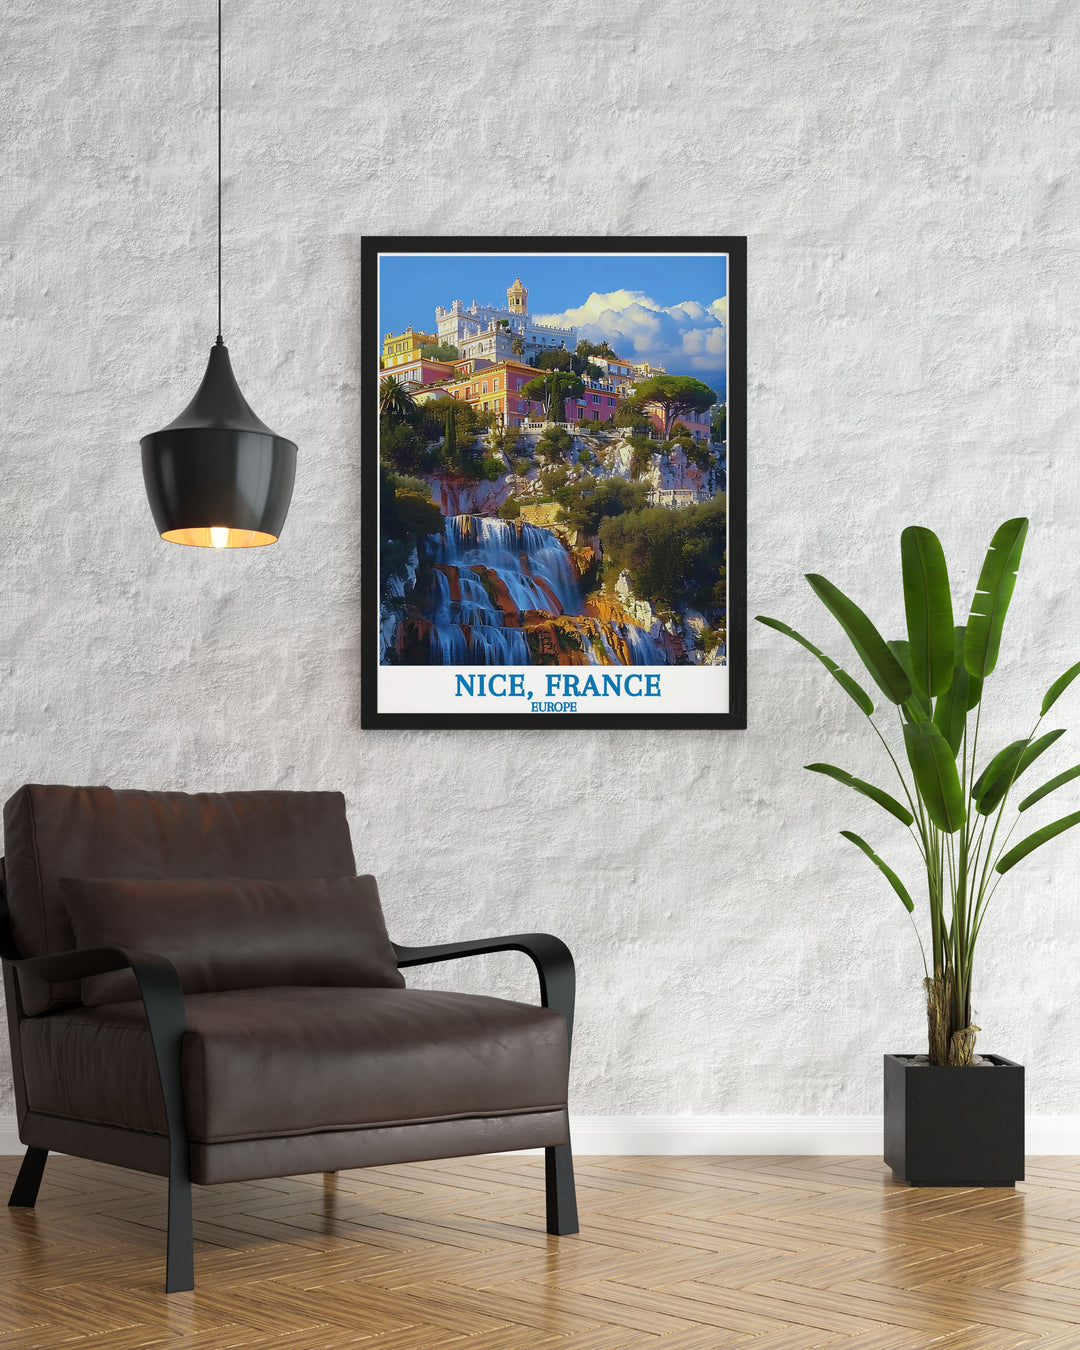 Featuring the historic Colline du Château in Nice, this travel poster brings to life the lush park, ancient ruins, and stunning sea views, making it a perfect addition to any collection of French Riviera art.